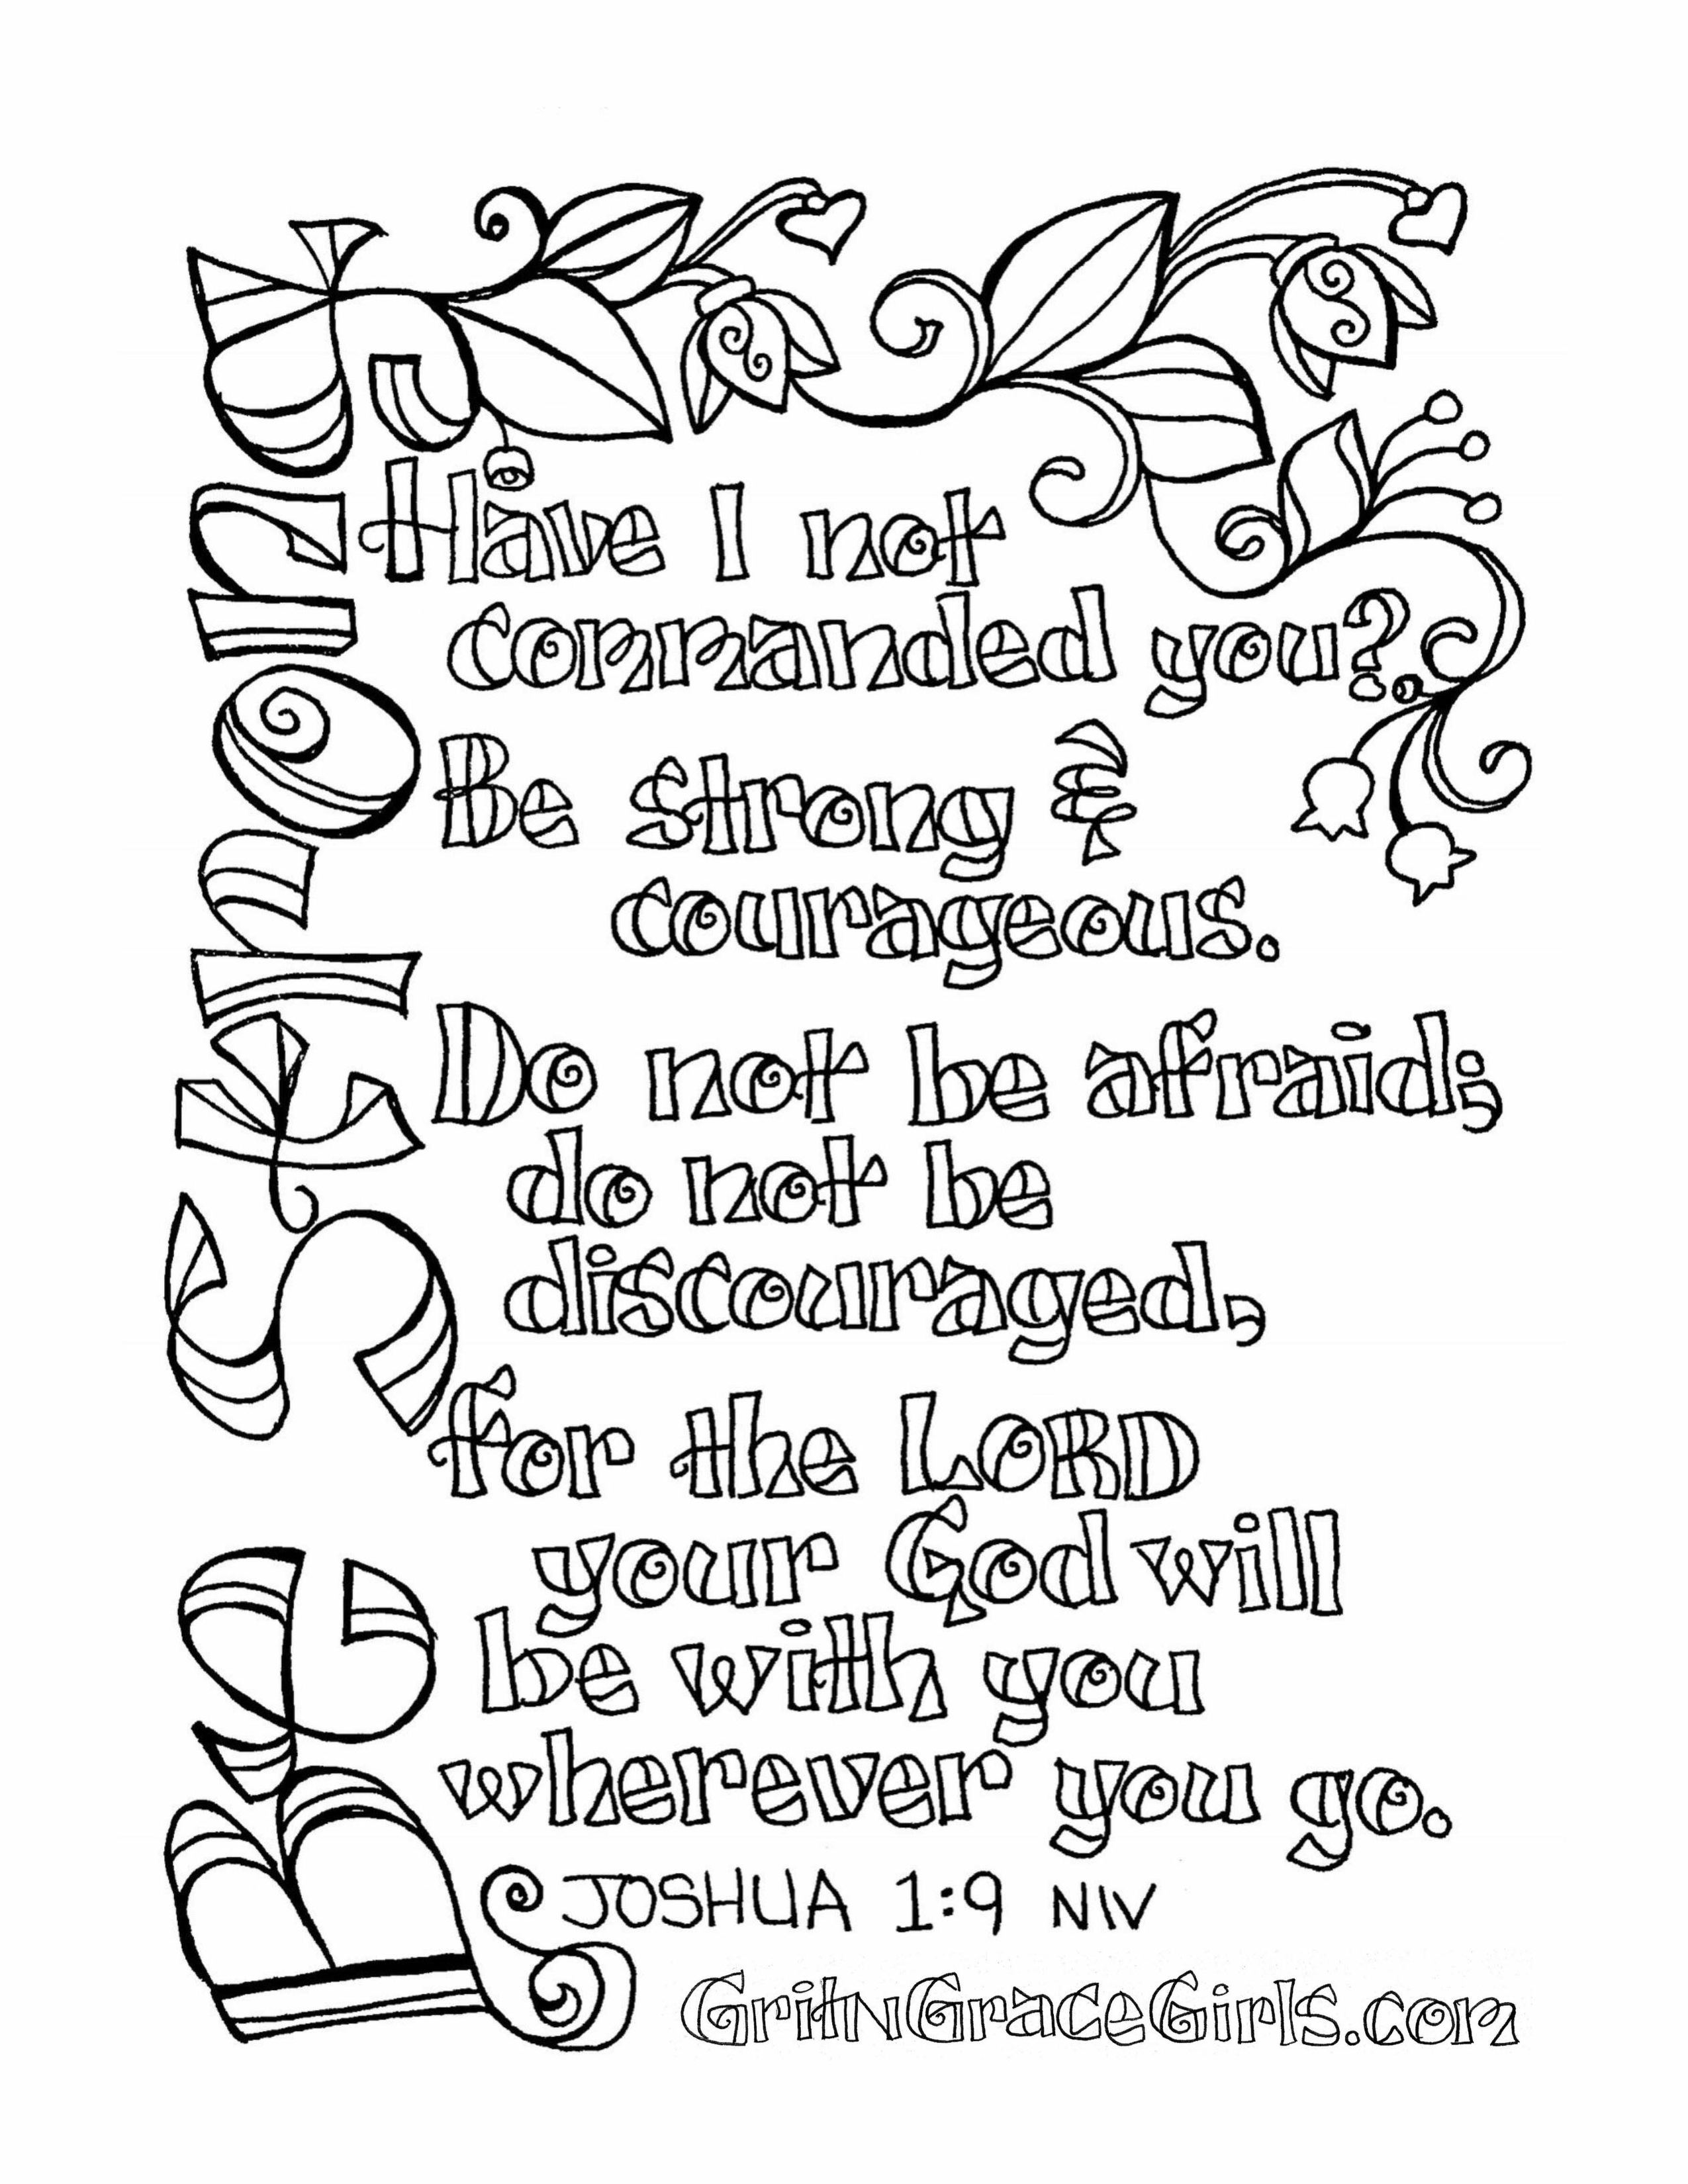 Joshua 1 9 Coloring Page Joshua coloring bible verses verse fromvictoryroad pages revisited colouring kids sheets memory josh quotes victory sometimes though even there feel